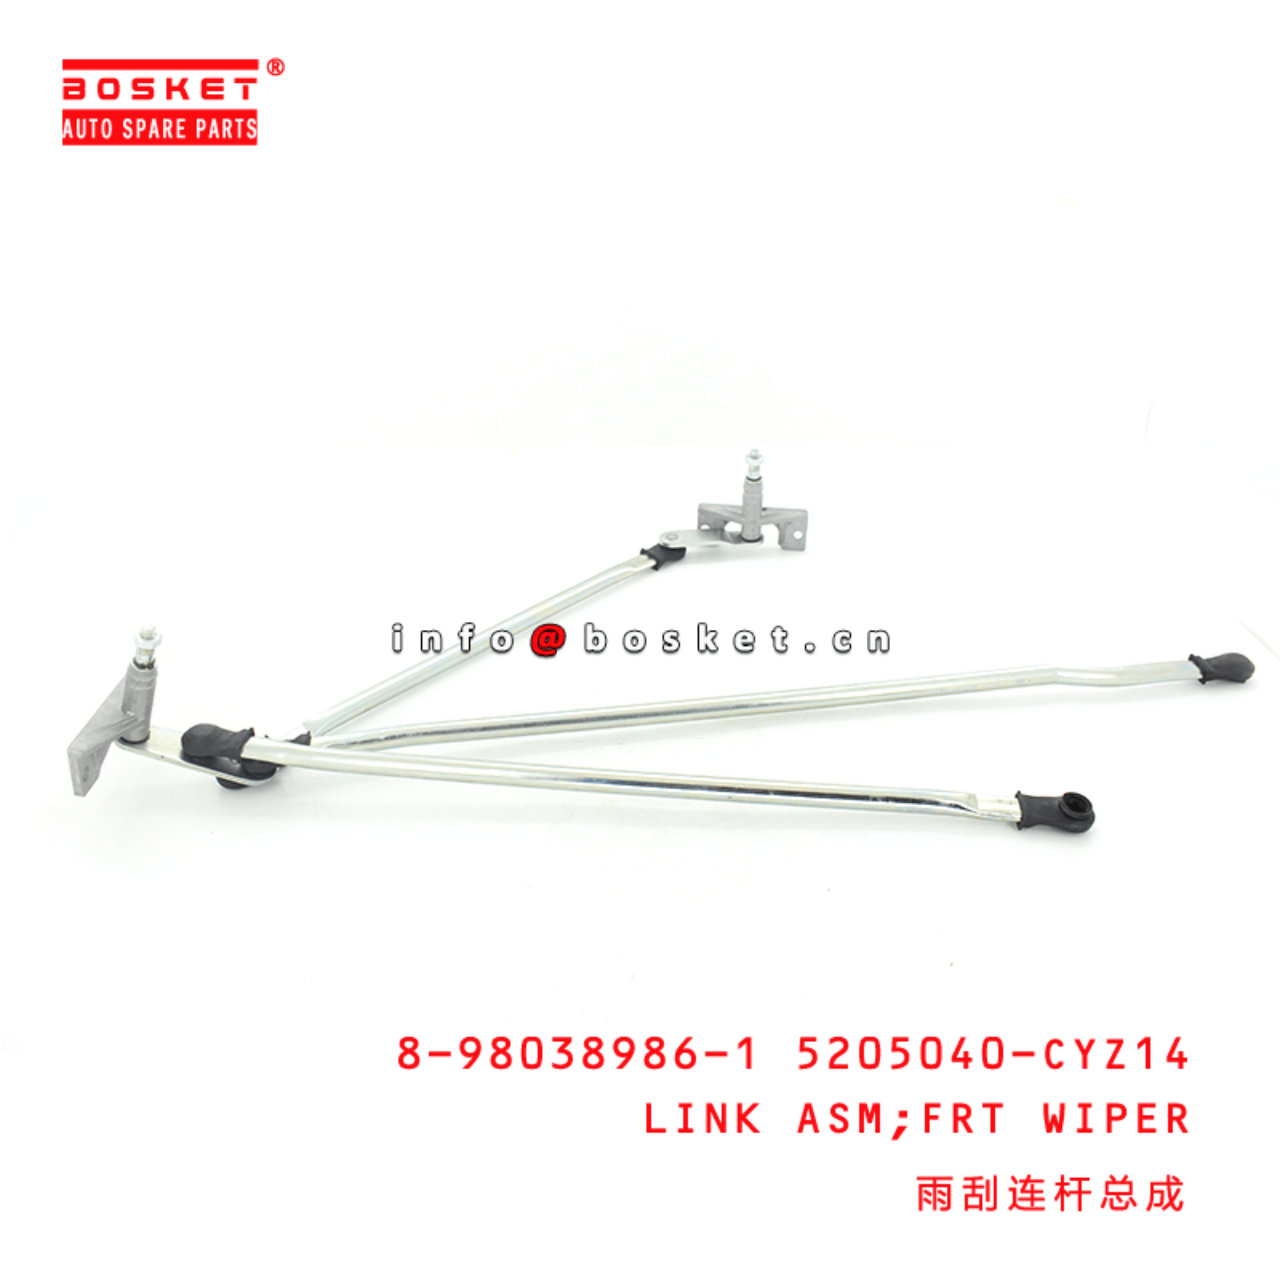 8-98038986-1 5205040-CYZ14 front wiper link assembly 8980389861 5205040CYZ14 Suitable for ISUZU VC46